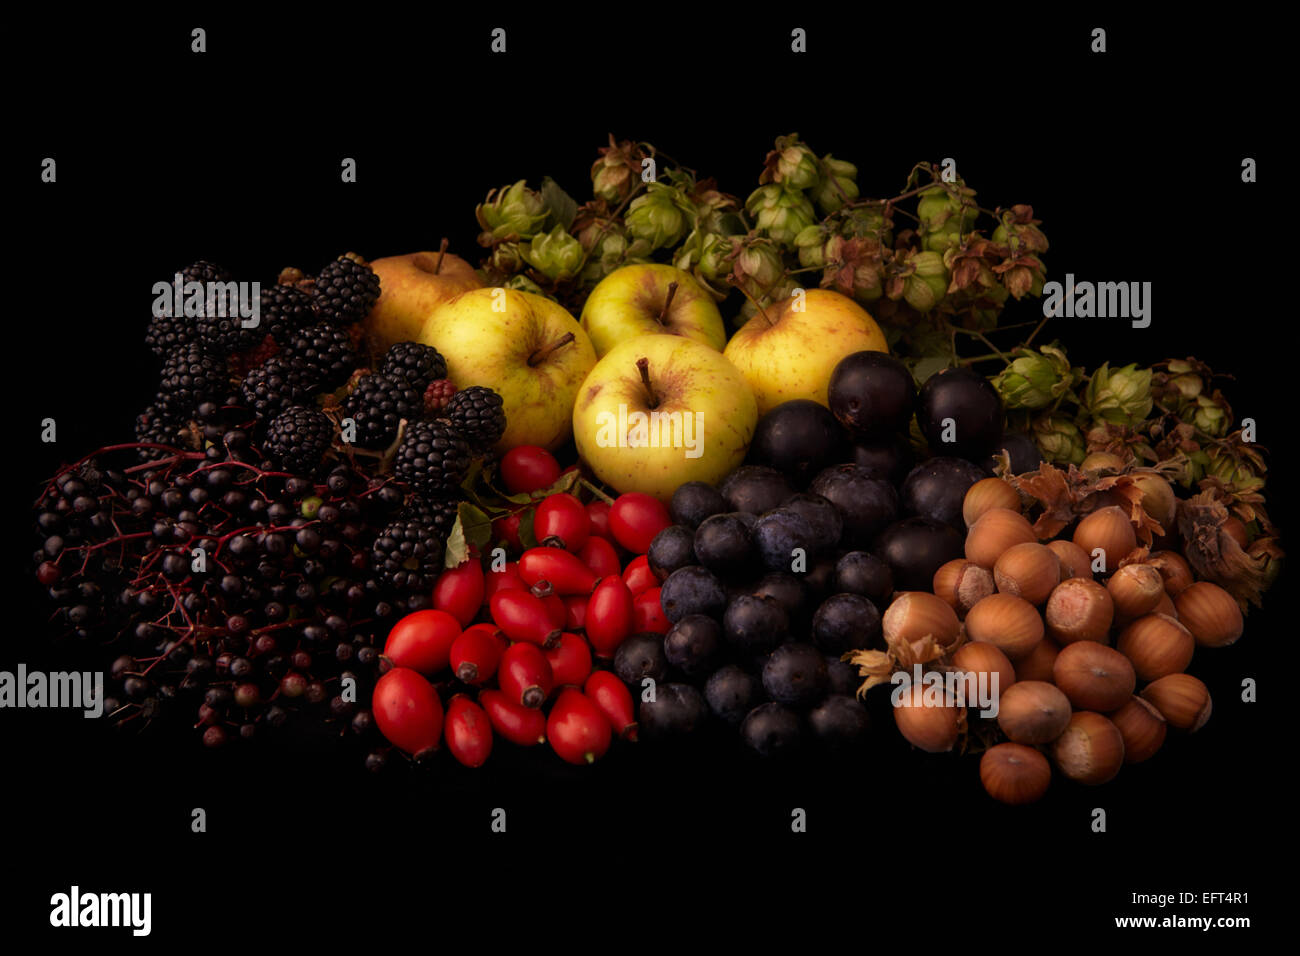 Fruits and nuts gathered from an English hedgerow in autumn Stock Photo